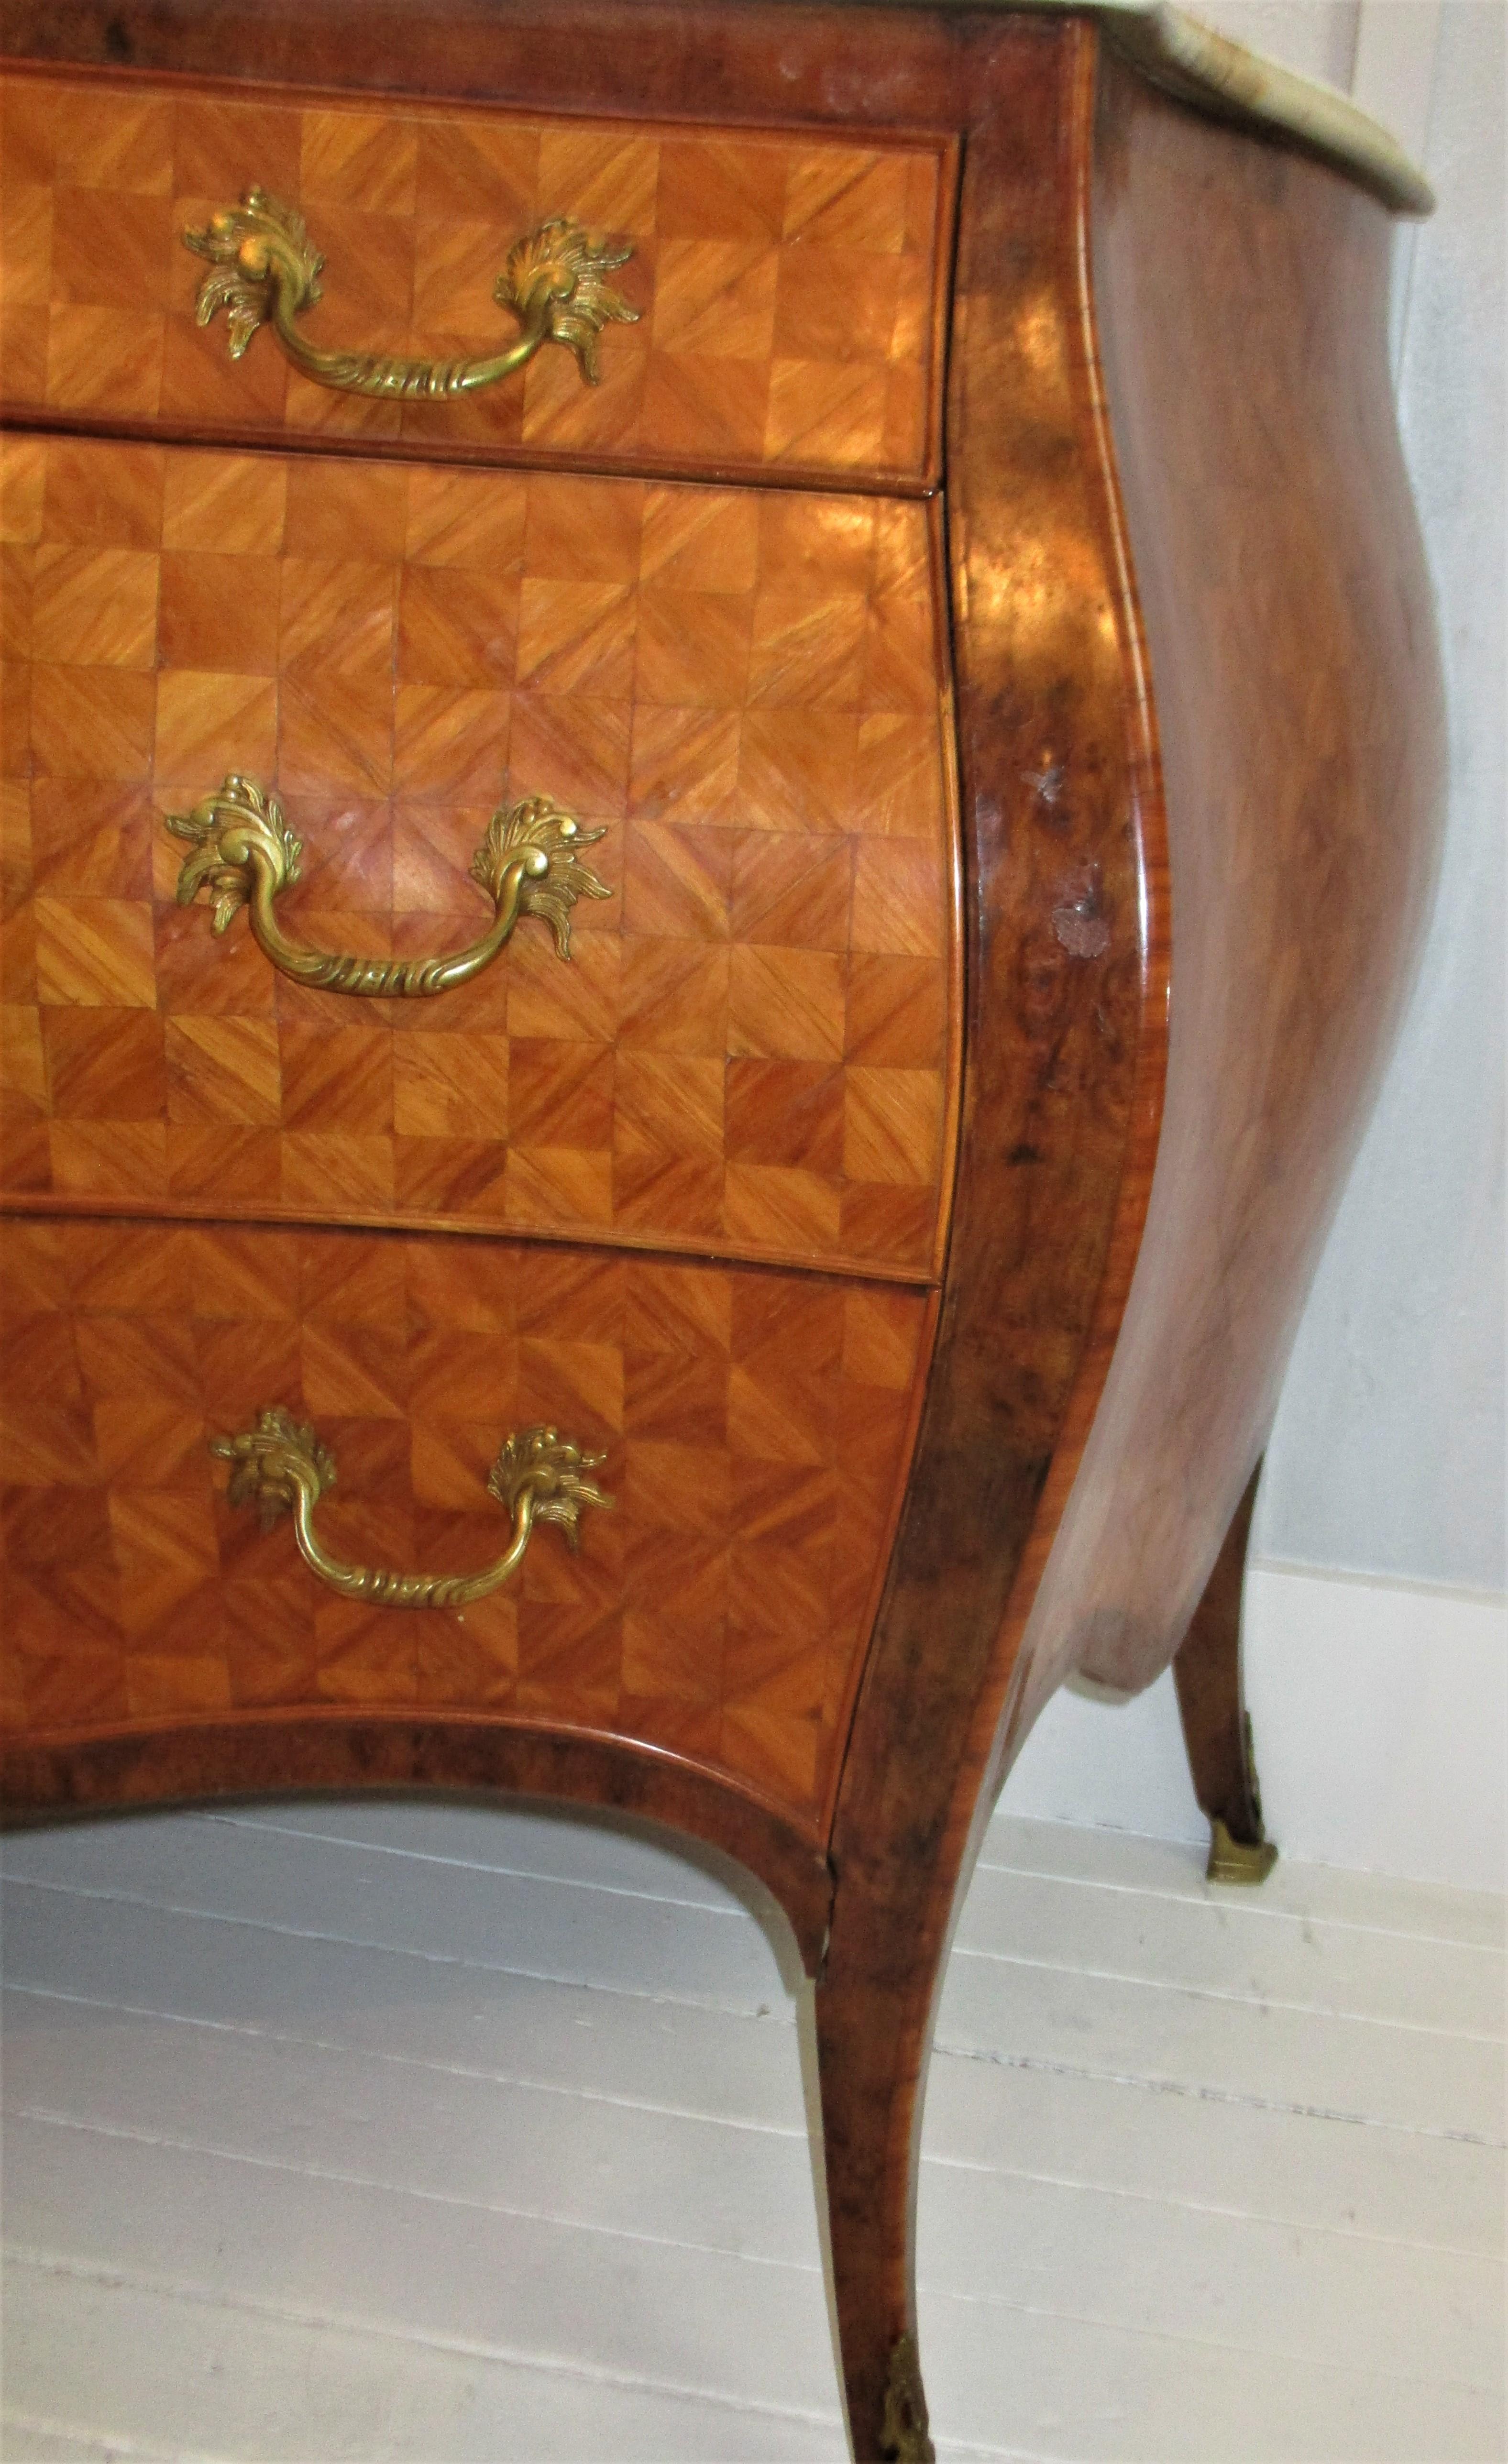 Italian 1960s marquetry inlay bombe commode with Italian Calacatta gold marble top. The marquetry design on this fine piece projects a three dimensional pattern that is quite lovely. Marquetry is a process of creating patterns and designs on objects